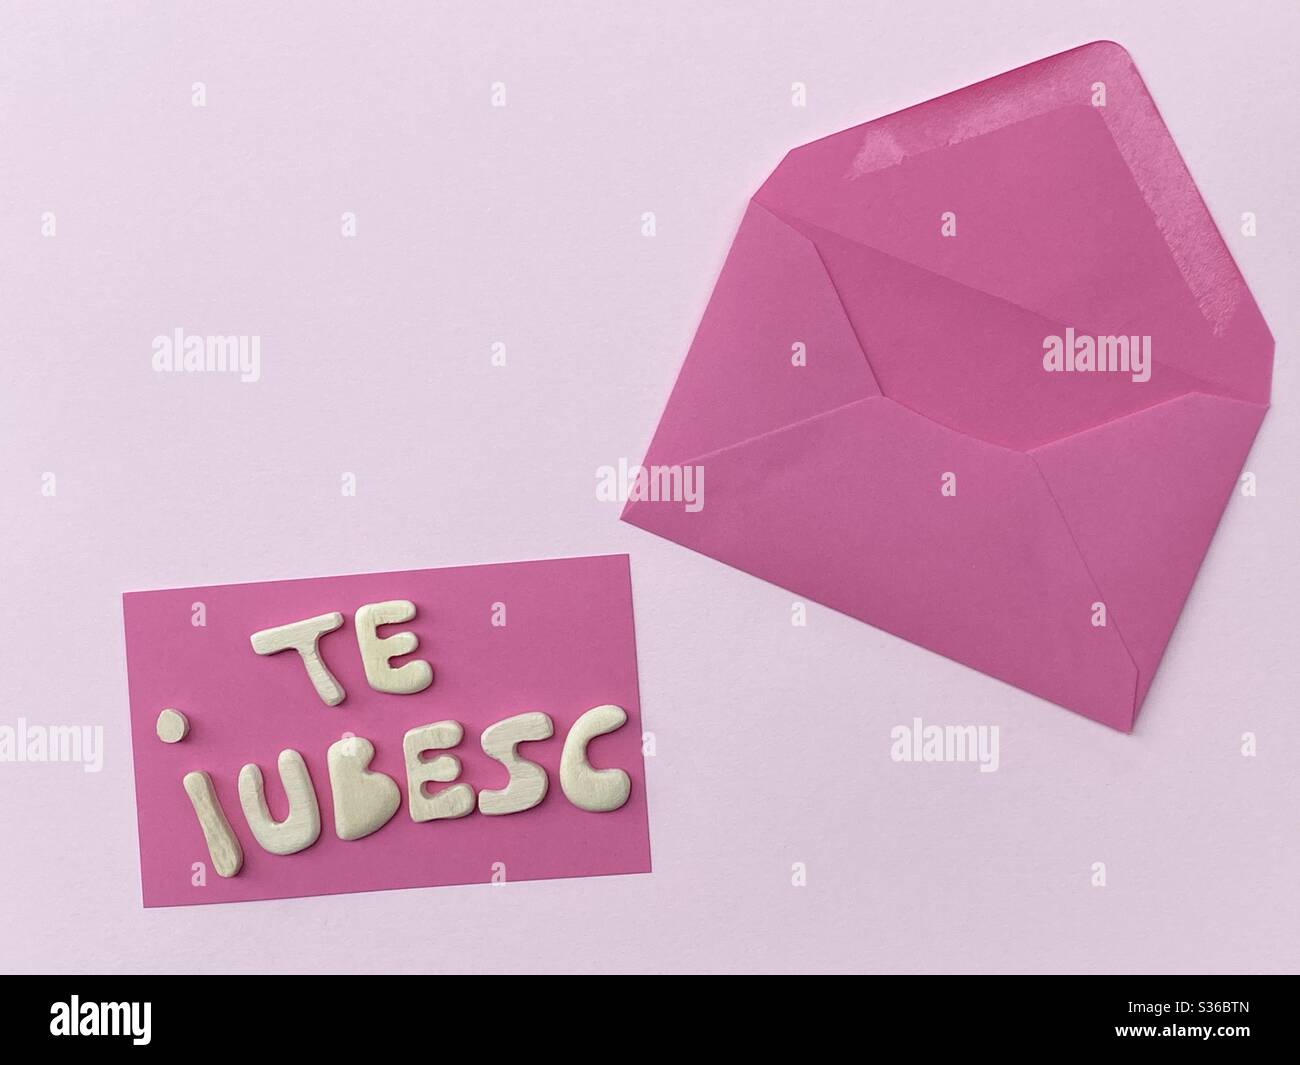 Te iubesc, romanian text meaning I love you composed with handmade wooden letters over pink card Stock Photo